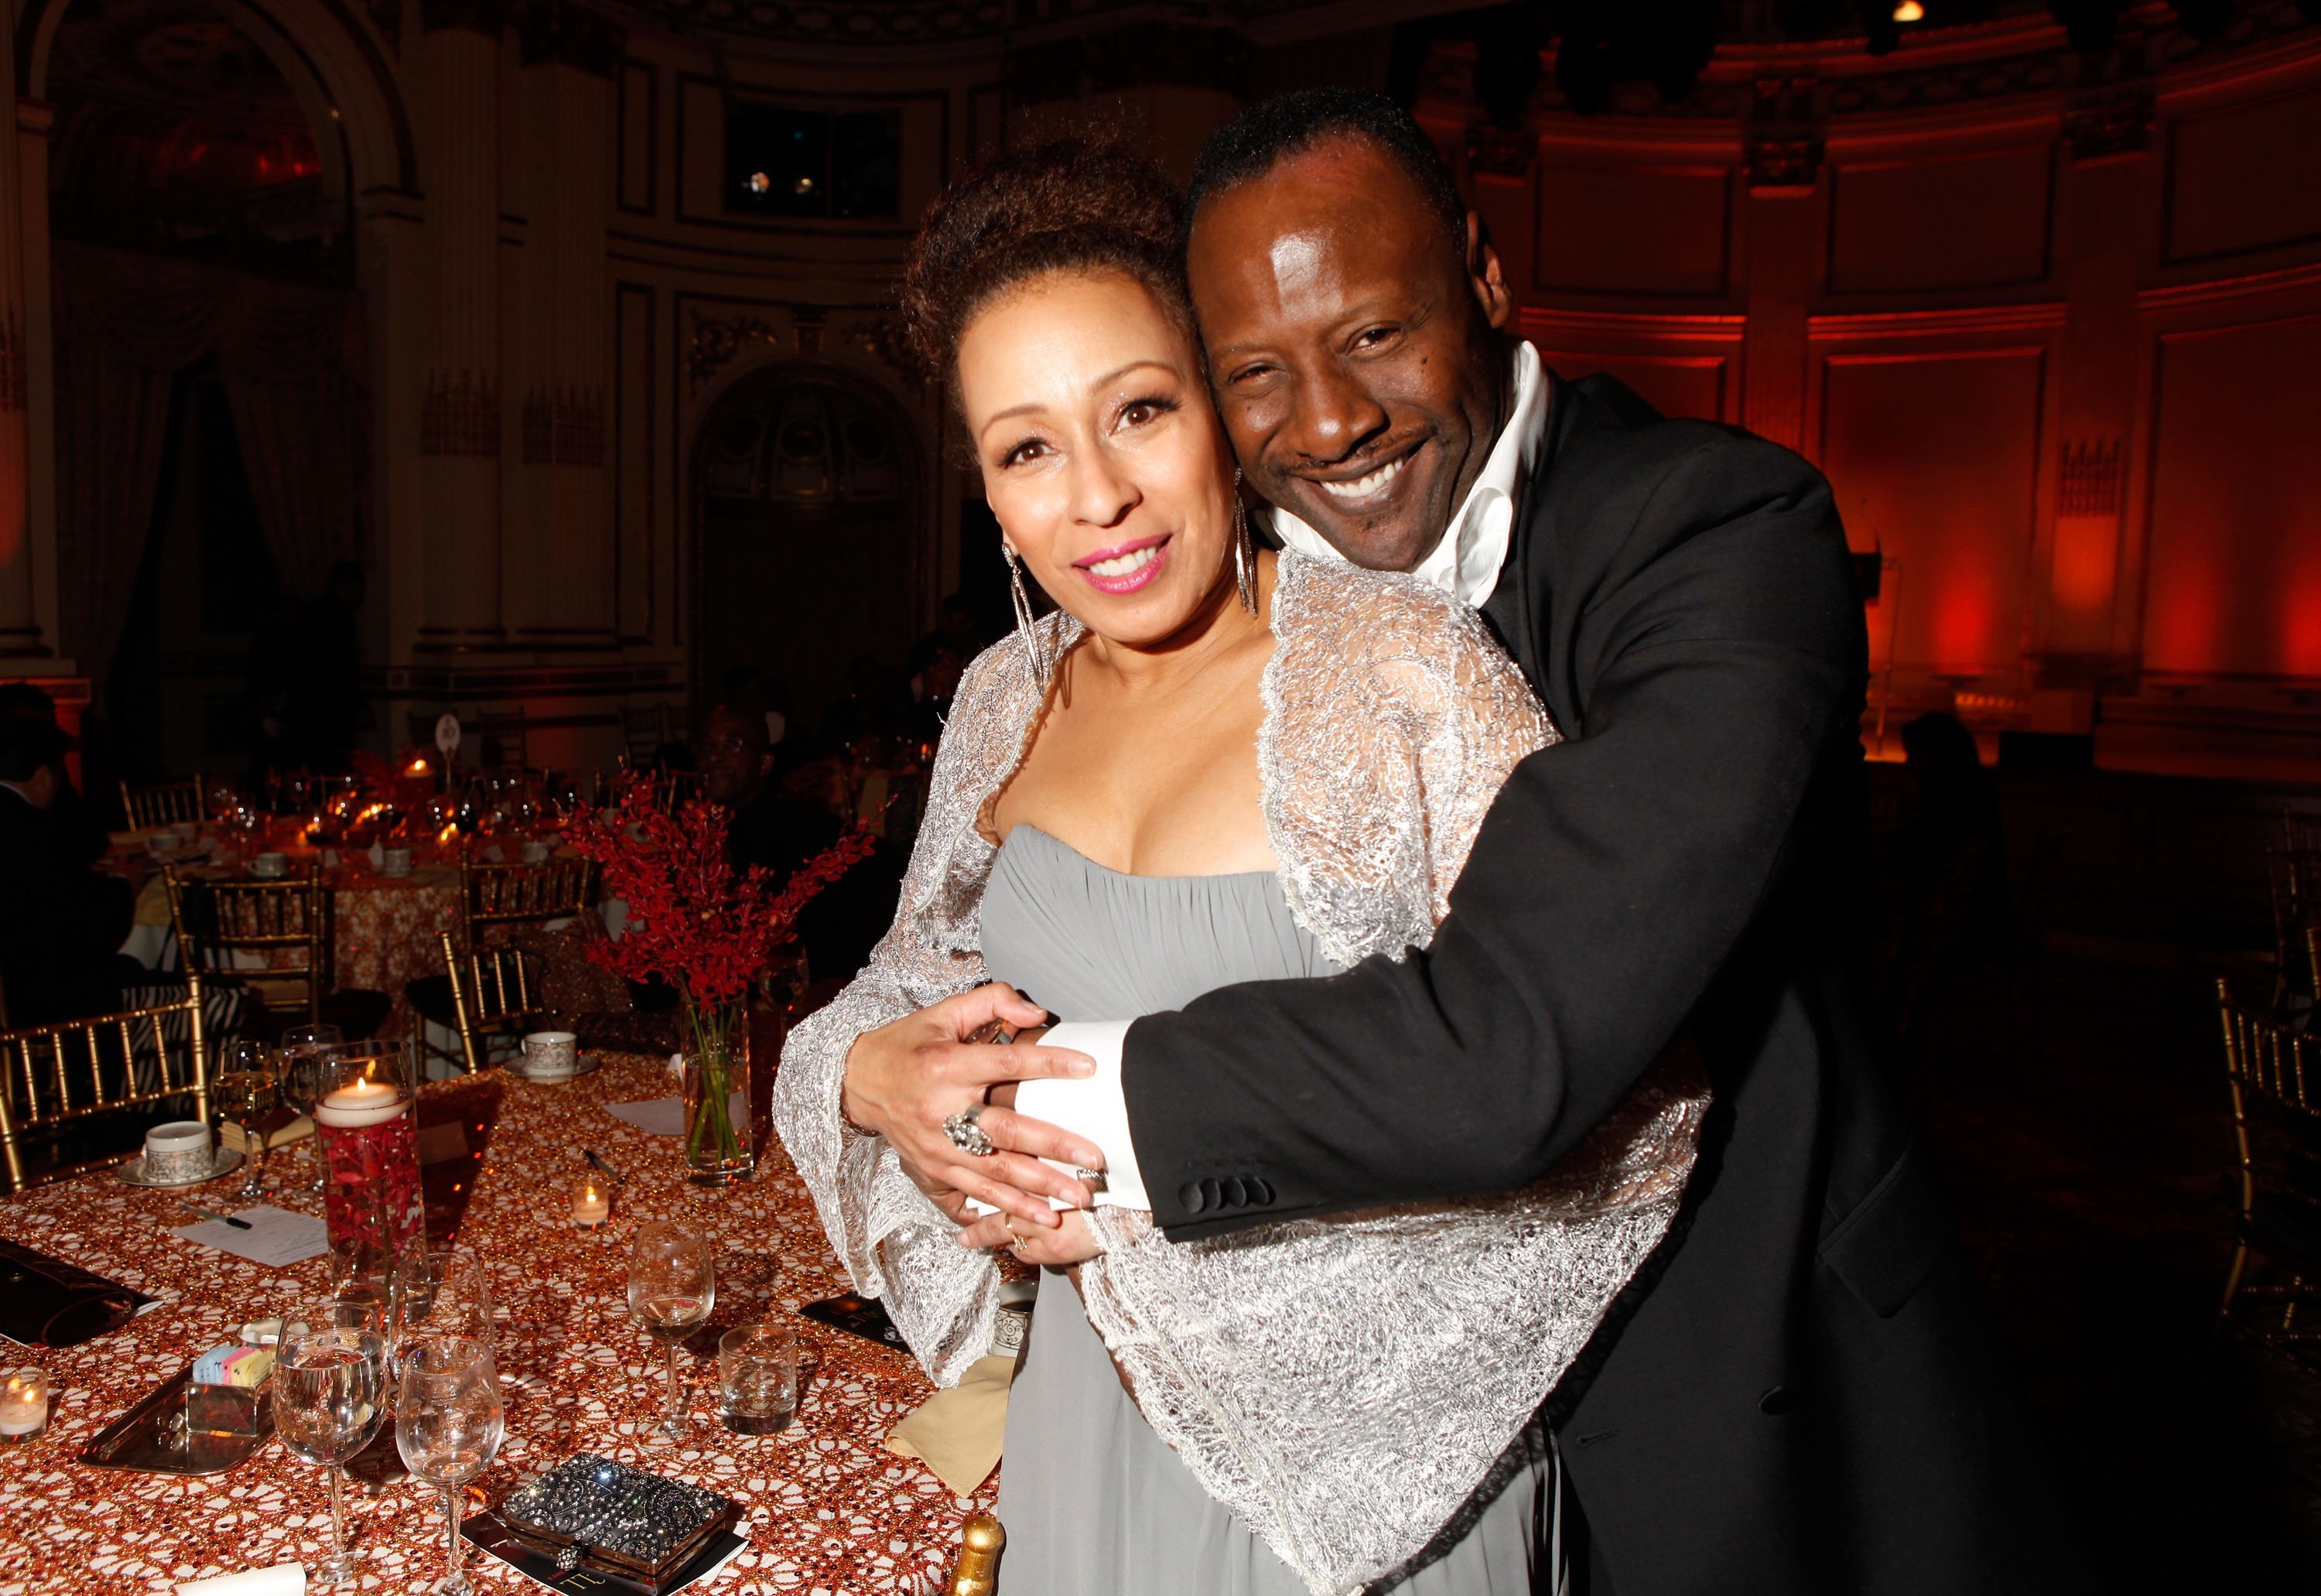 Tamara Tunie and Gregory Generet at the Torch Ball hosted by Evidence, A Dance Company. | Source: Getty Images